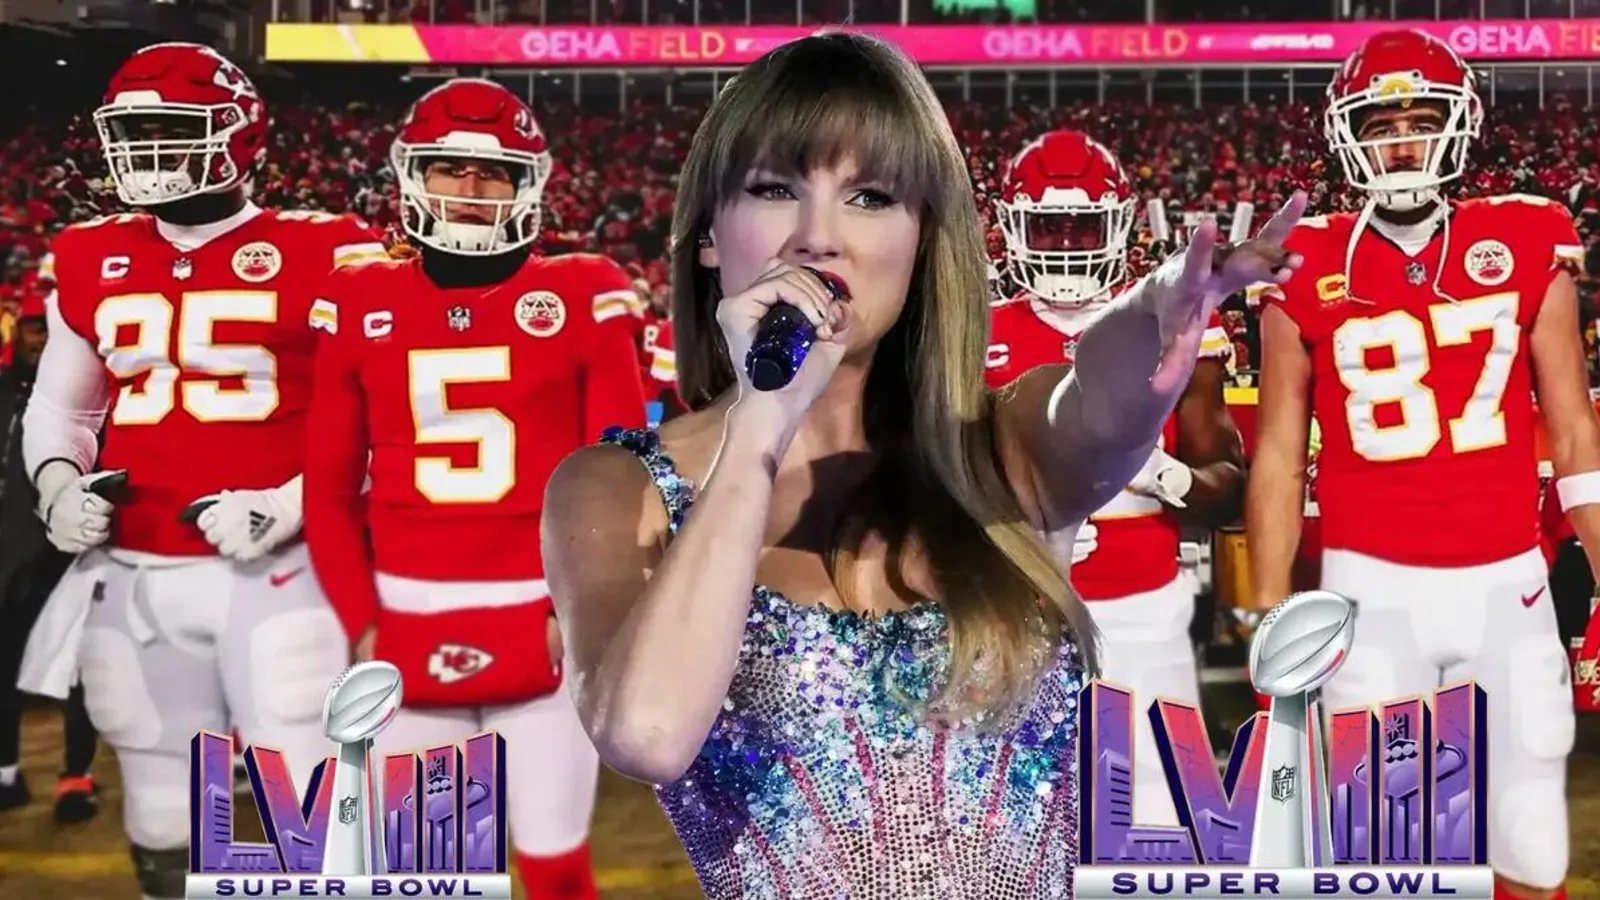 Taylor Swift at Super Bowl 58: Surprises, Prop Bets, and a Possible Proposal?